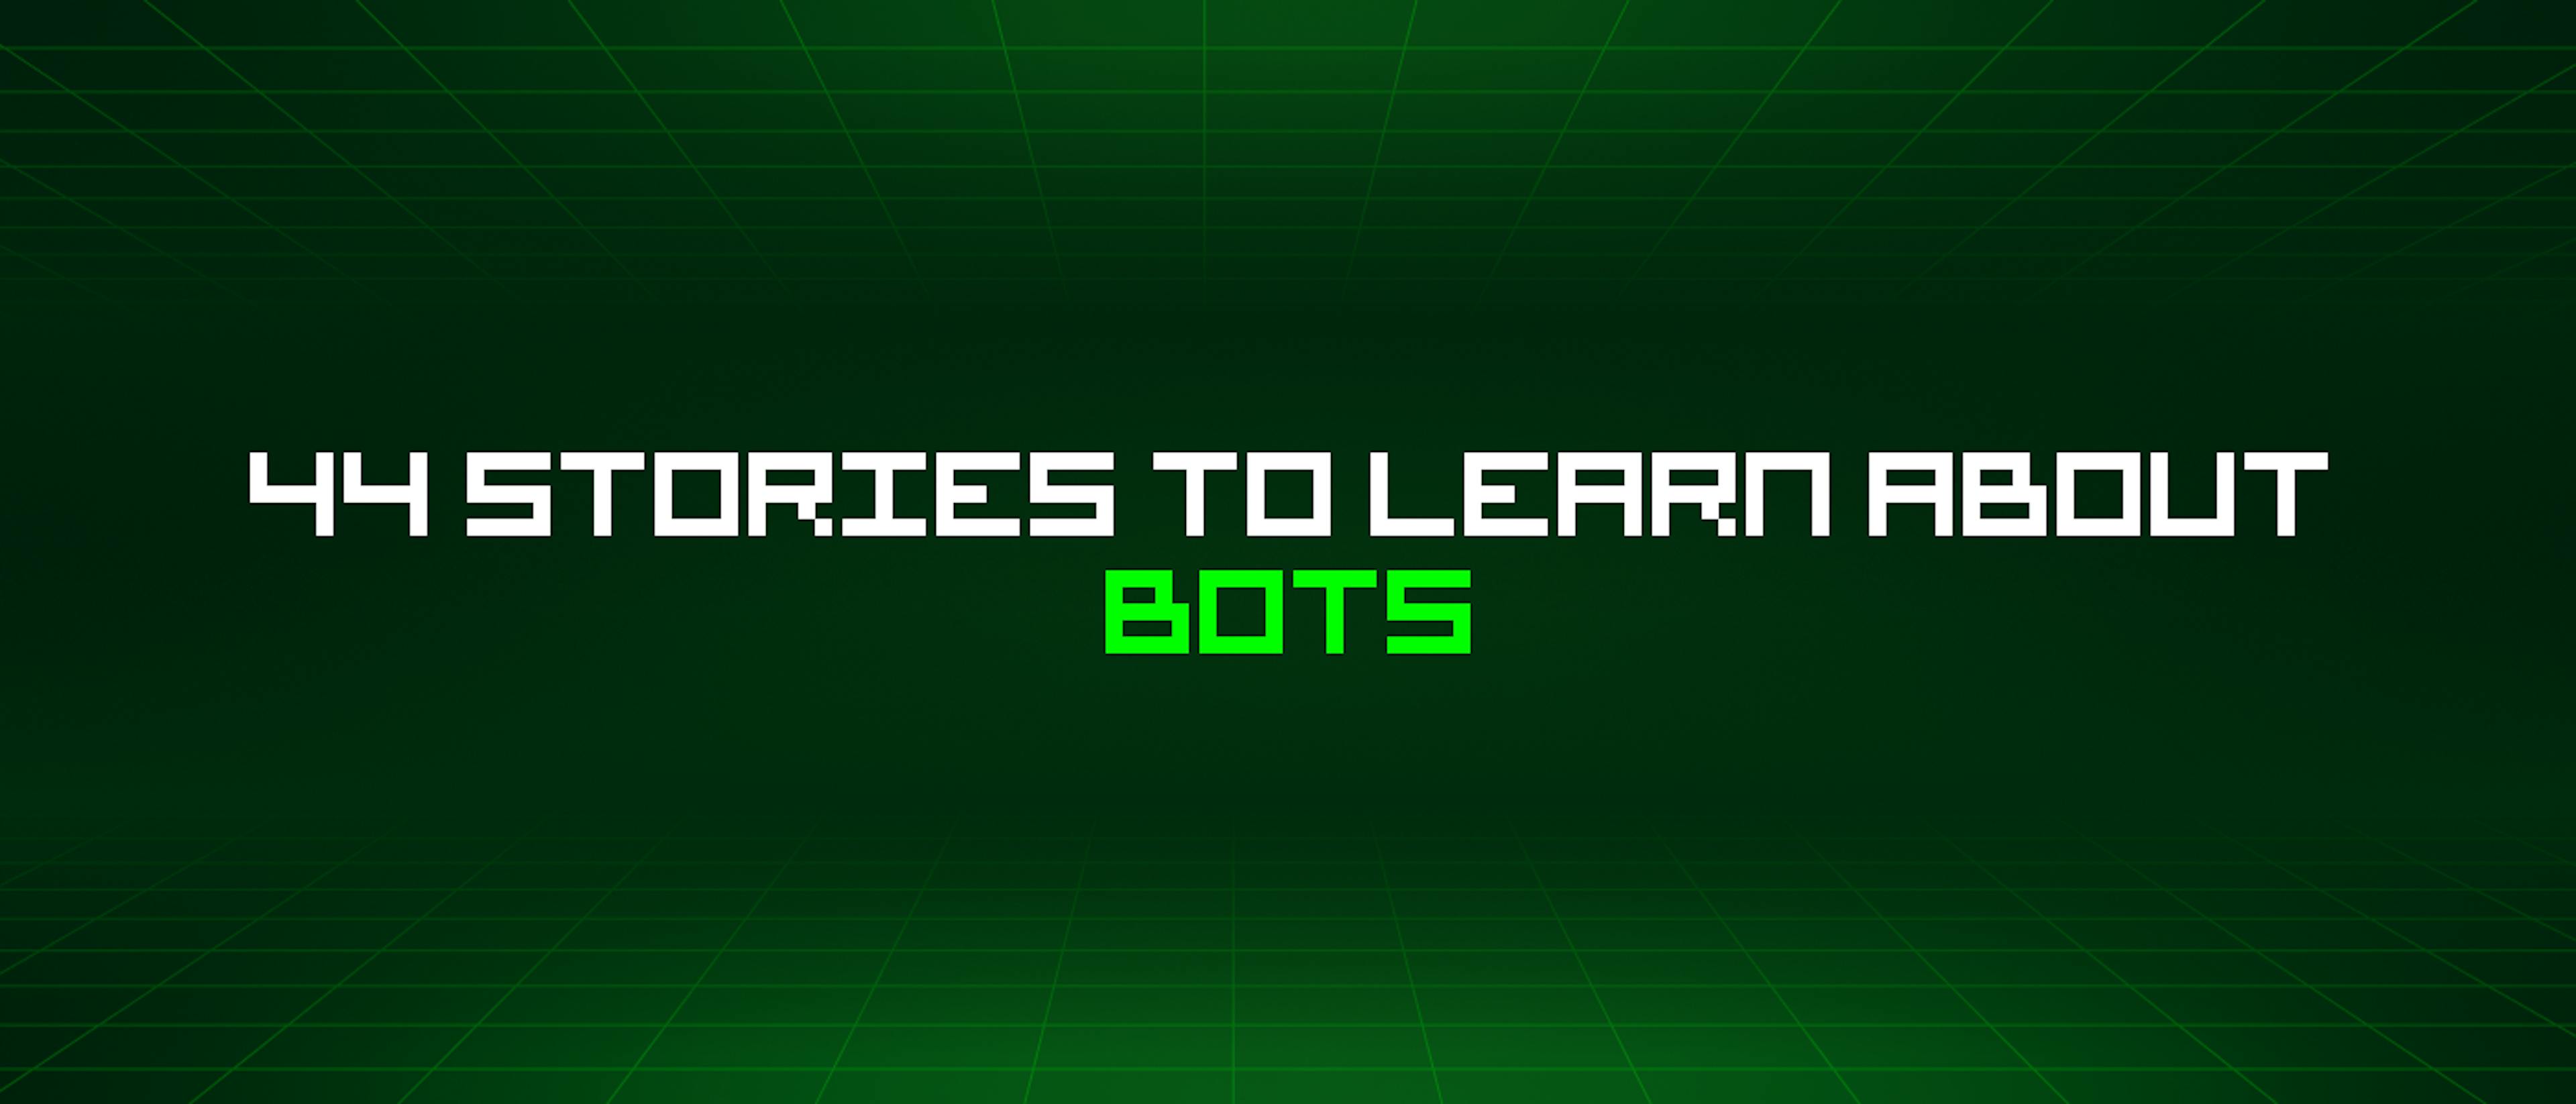 featured image - 44 Stories To Learn About Bots